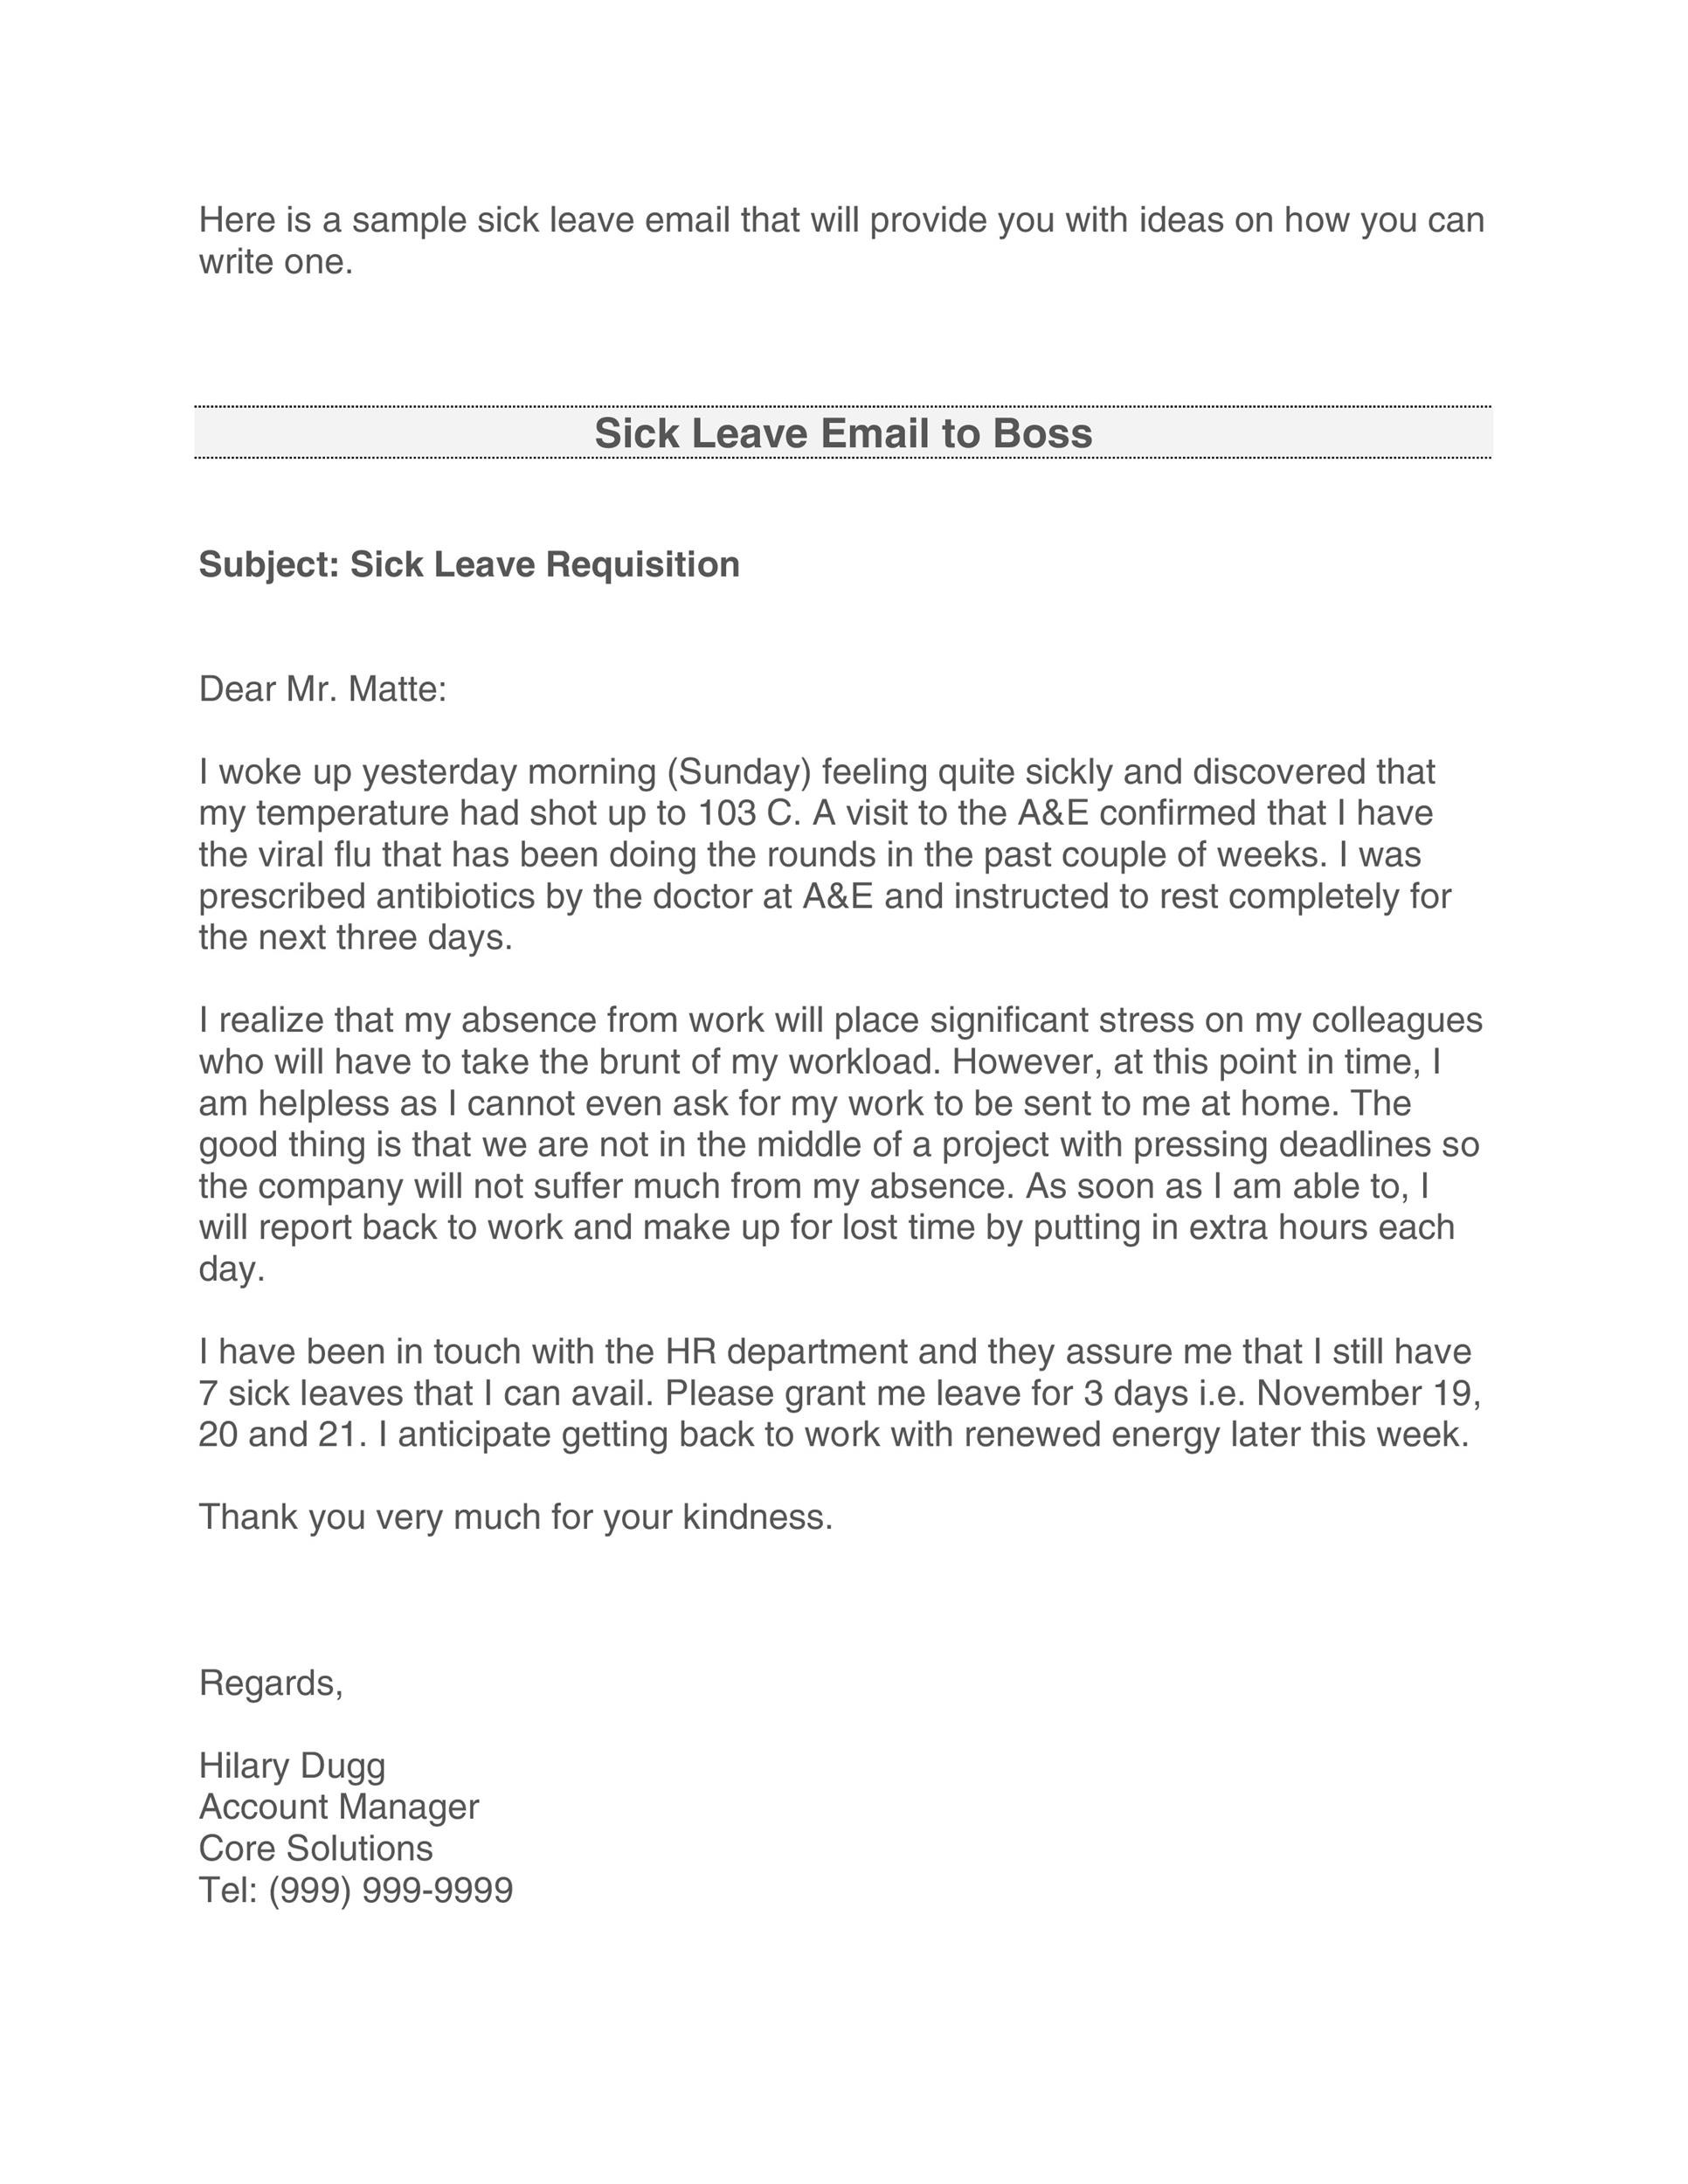 Free sick leave email 19